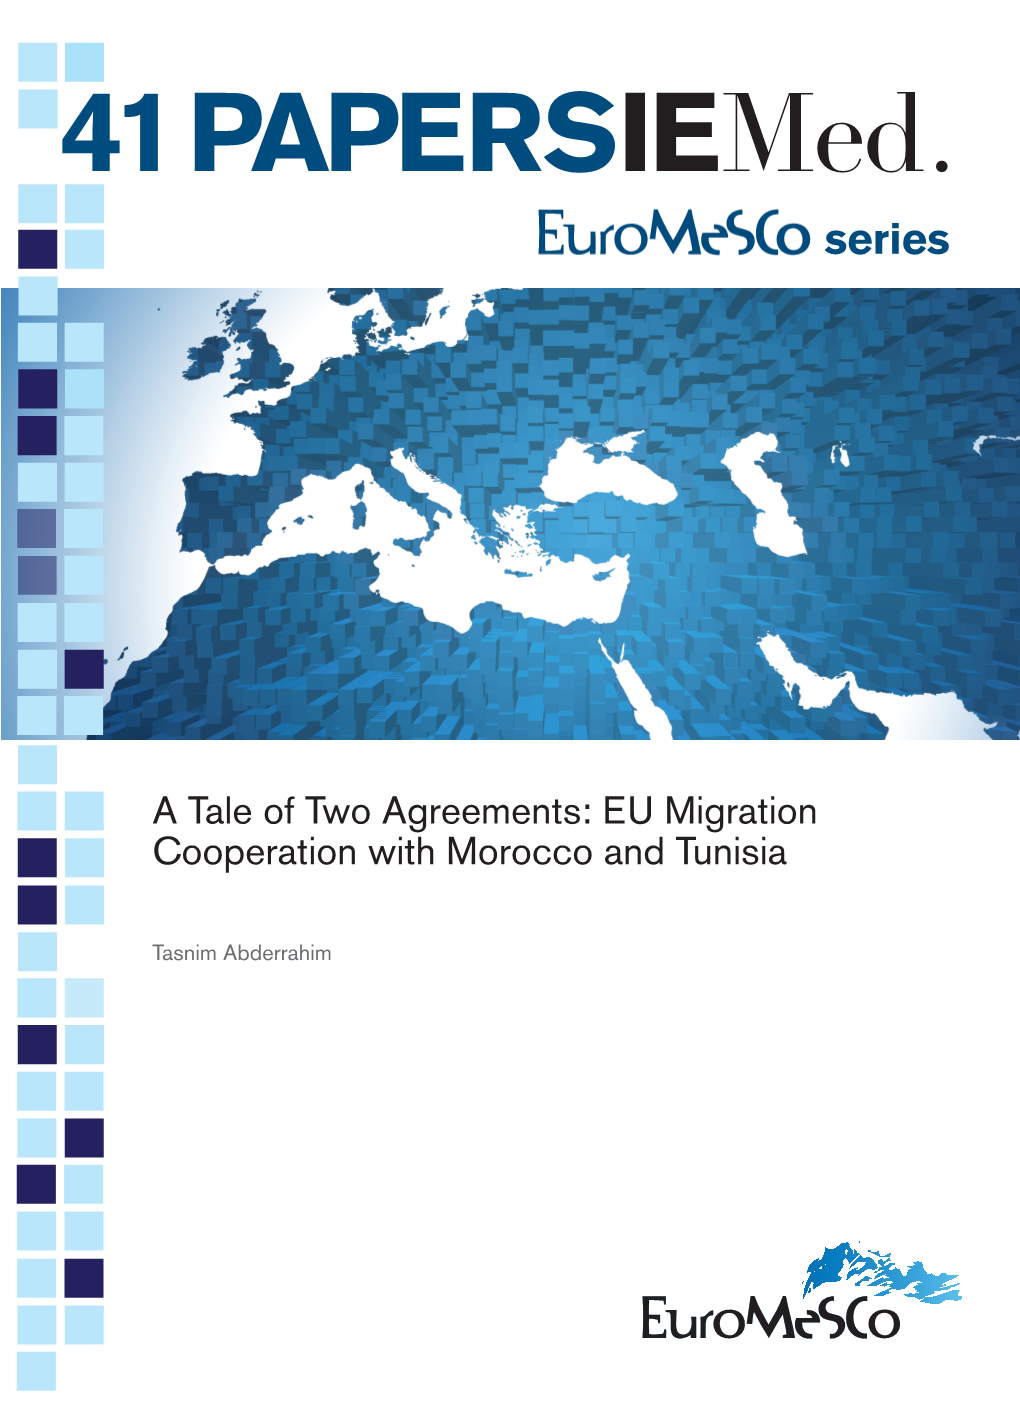 EU Migration Cooperation with Morocco and Tunisia